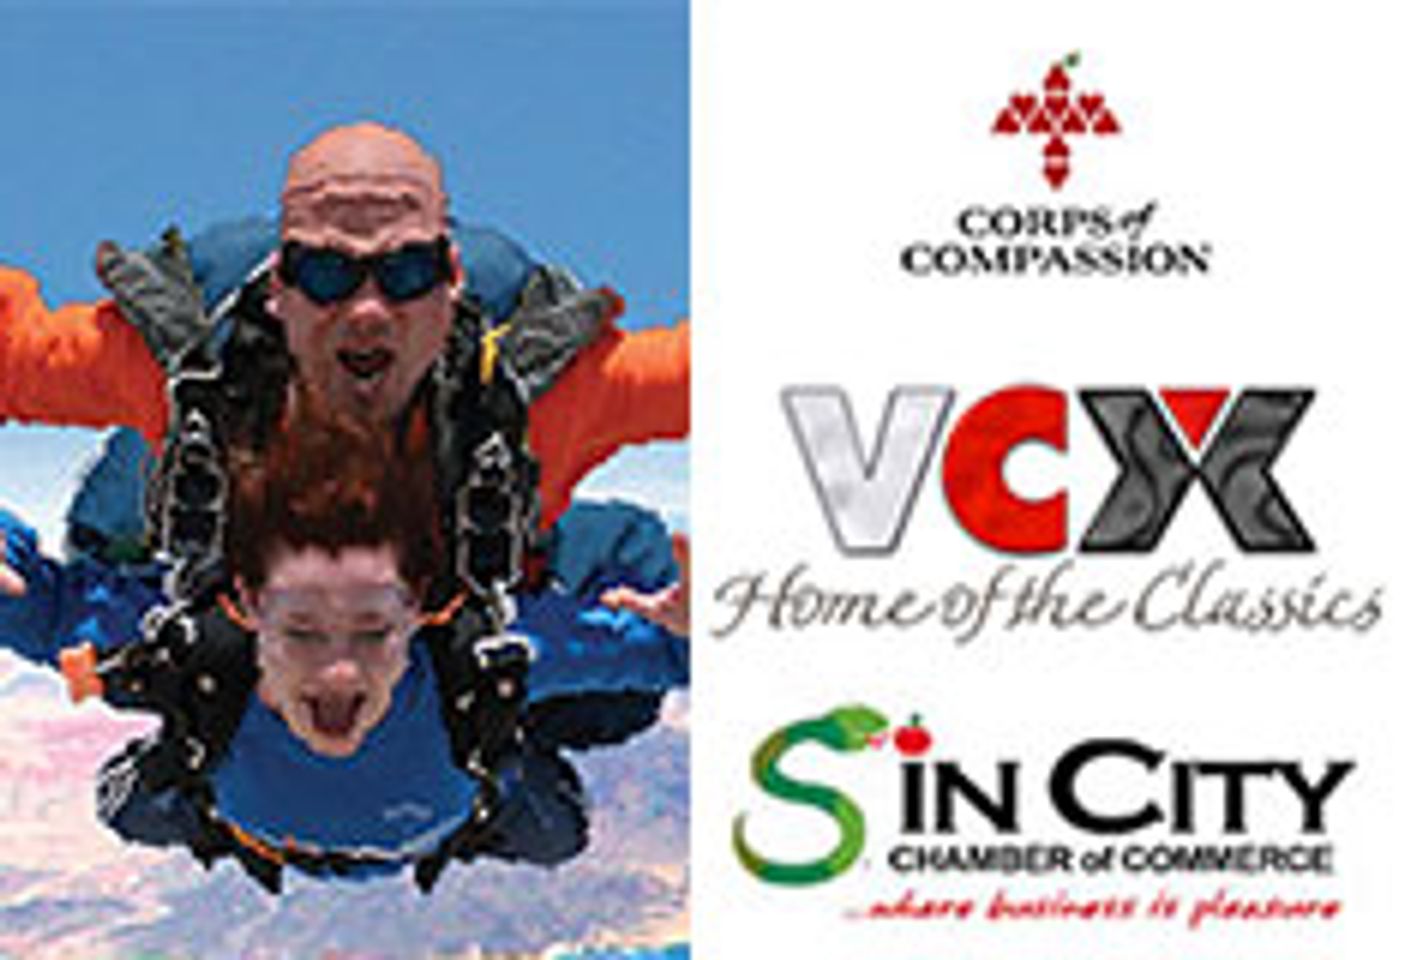 VCX Owner Skydives for Charity